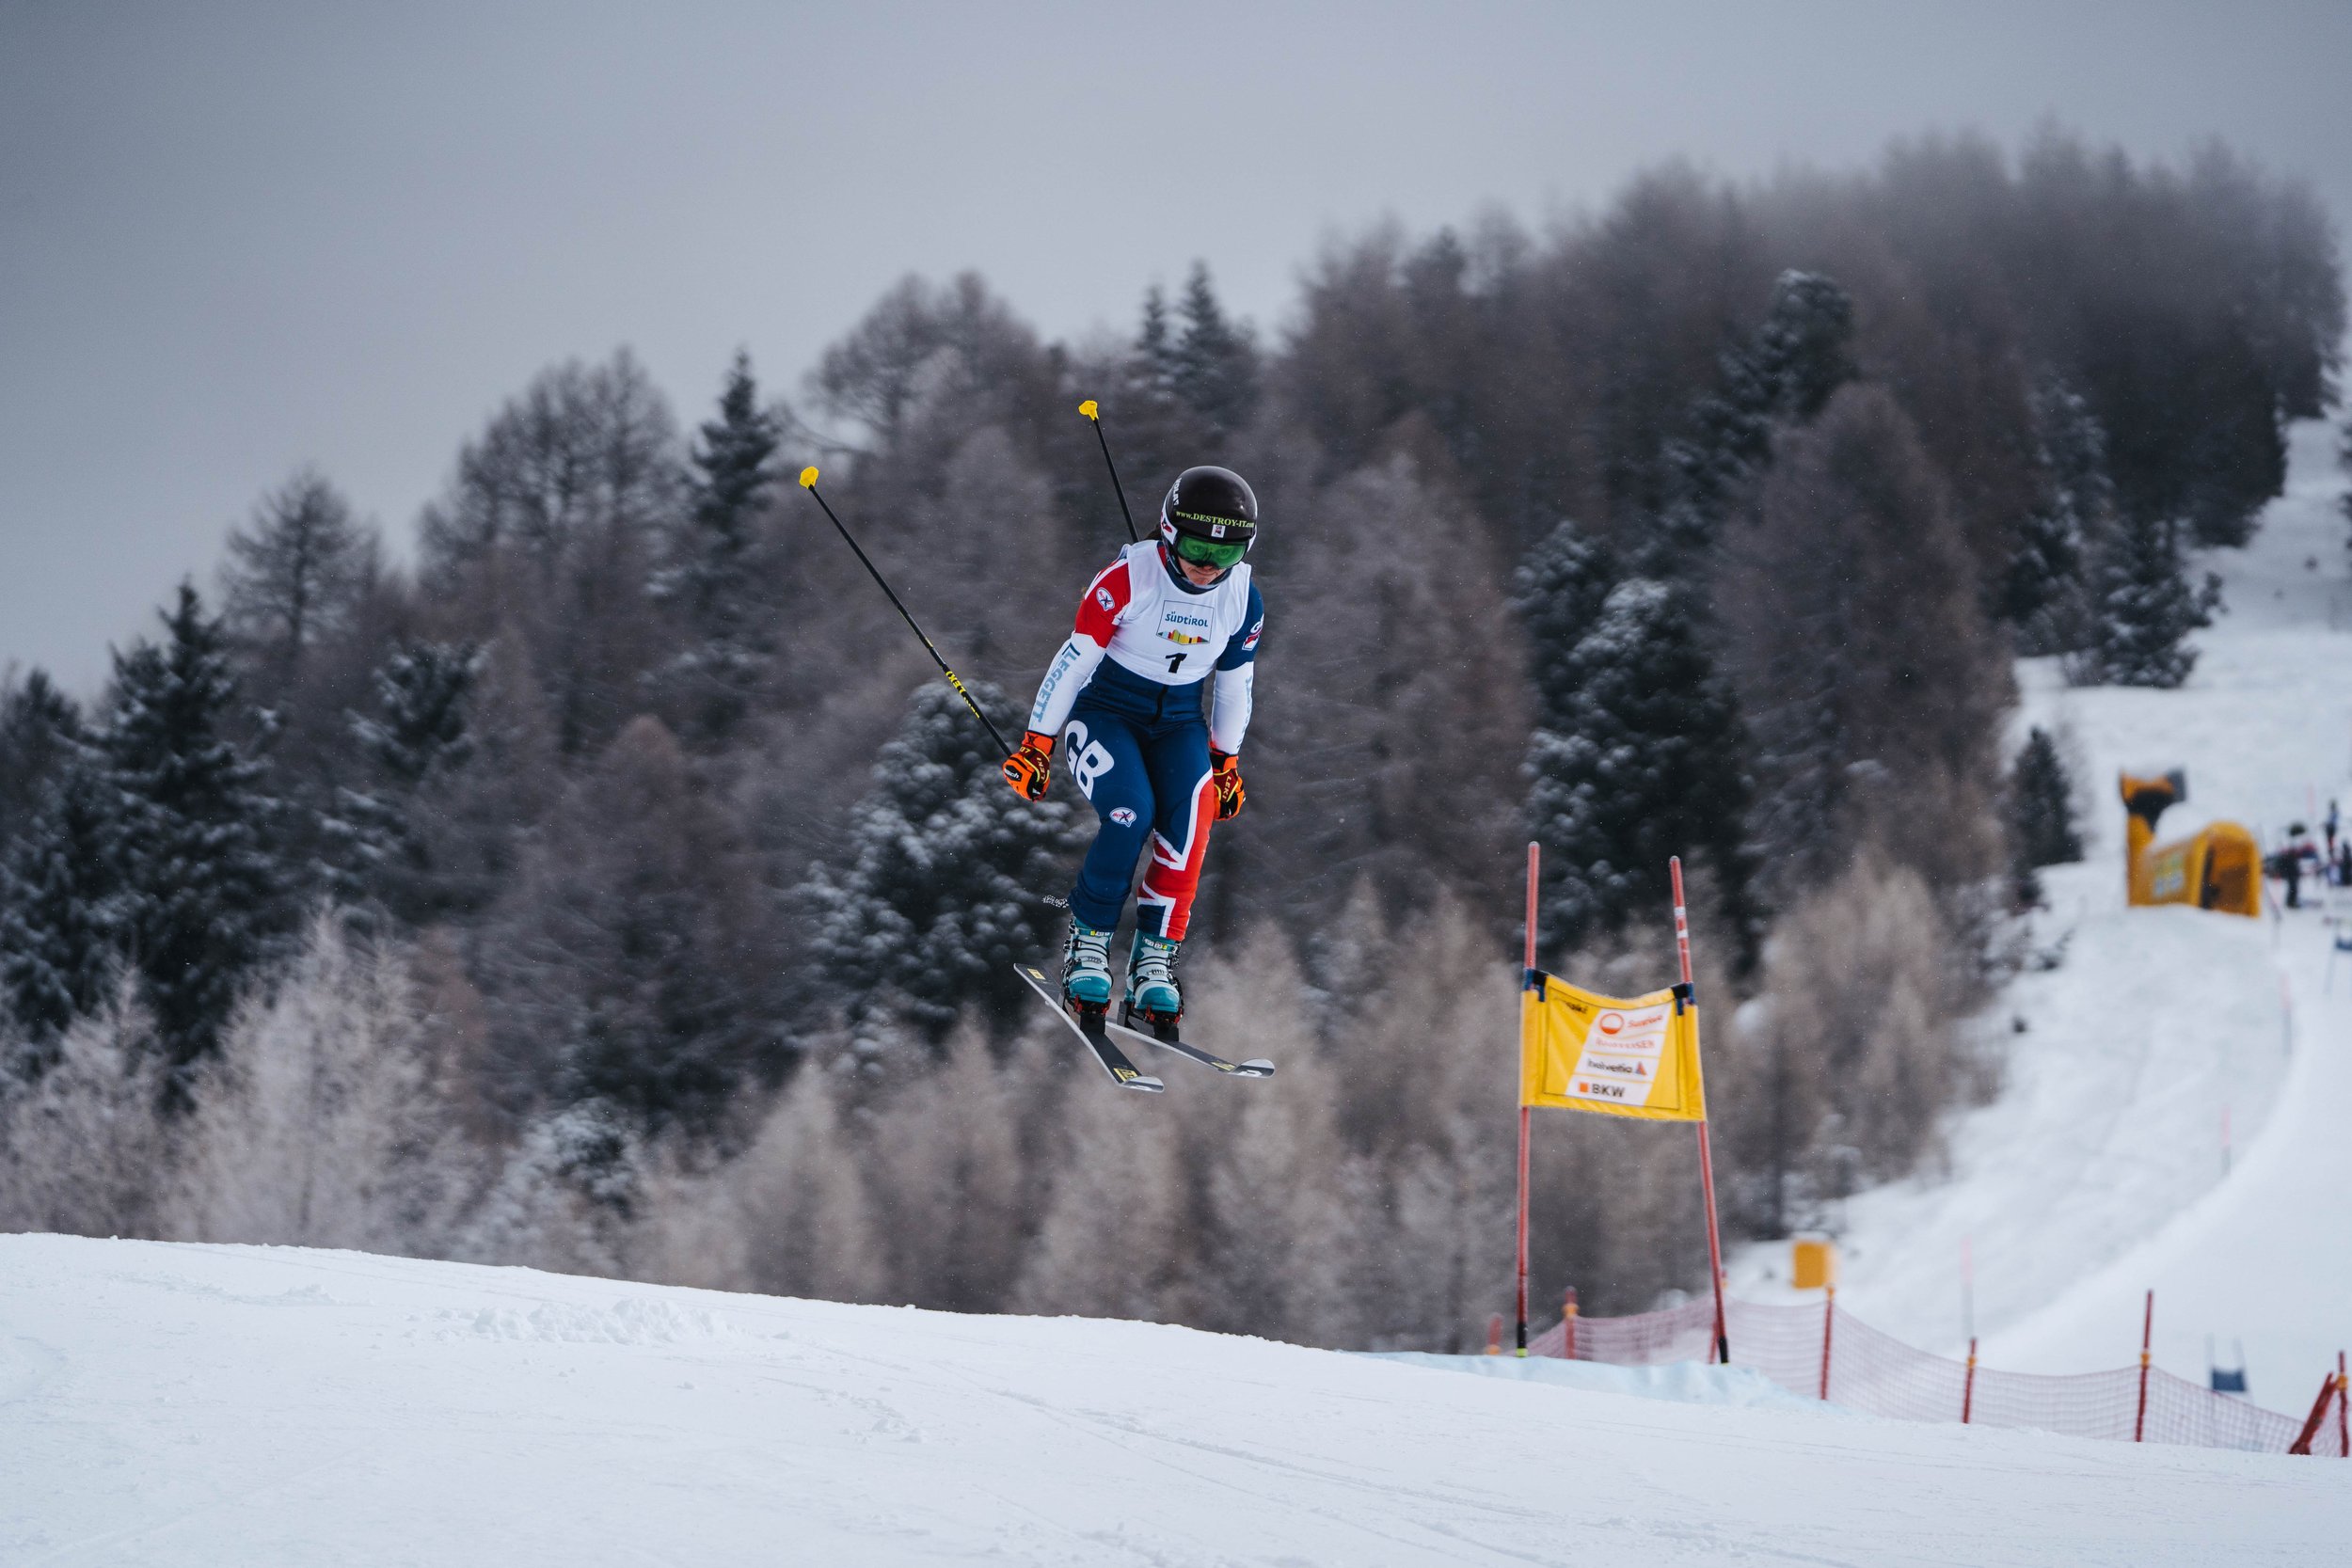 Jasmin Taylor ACTION SHOT at World Cup in Carezza ITALY by Josefo Bexer.jpg